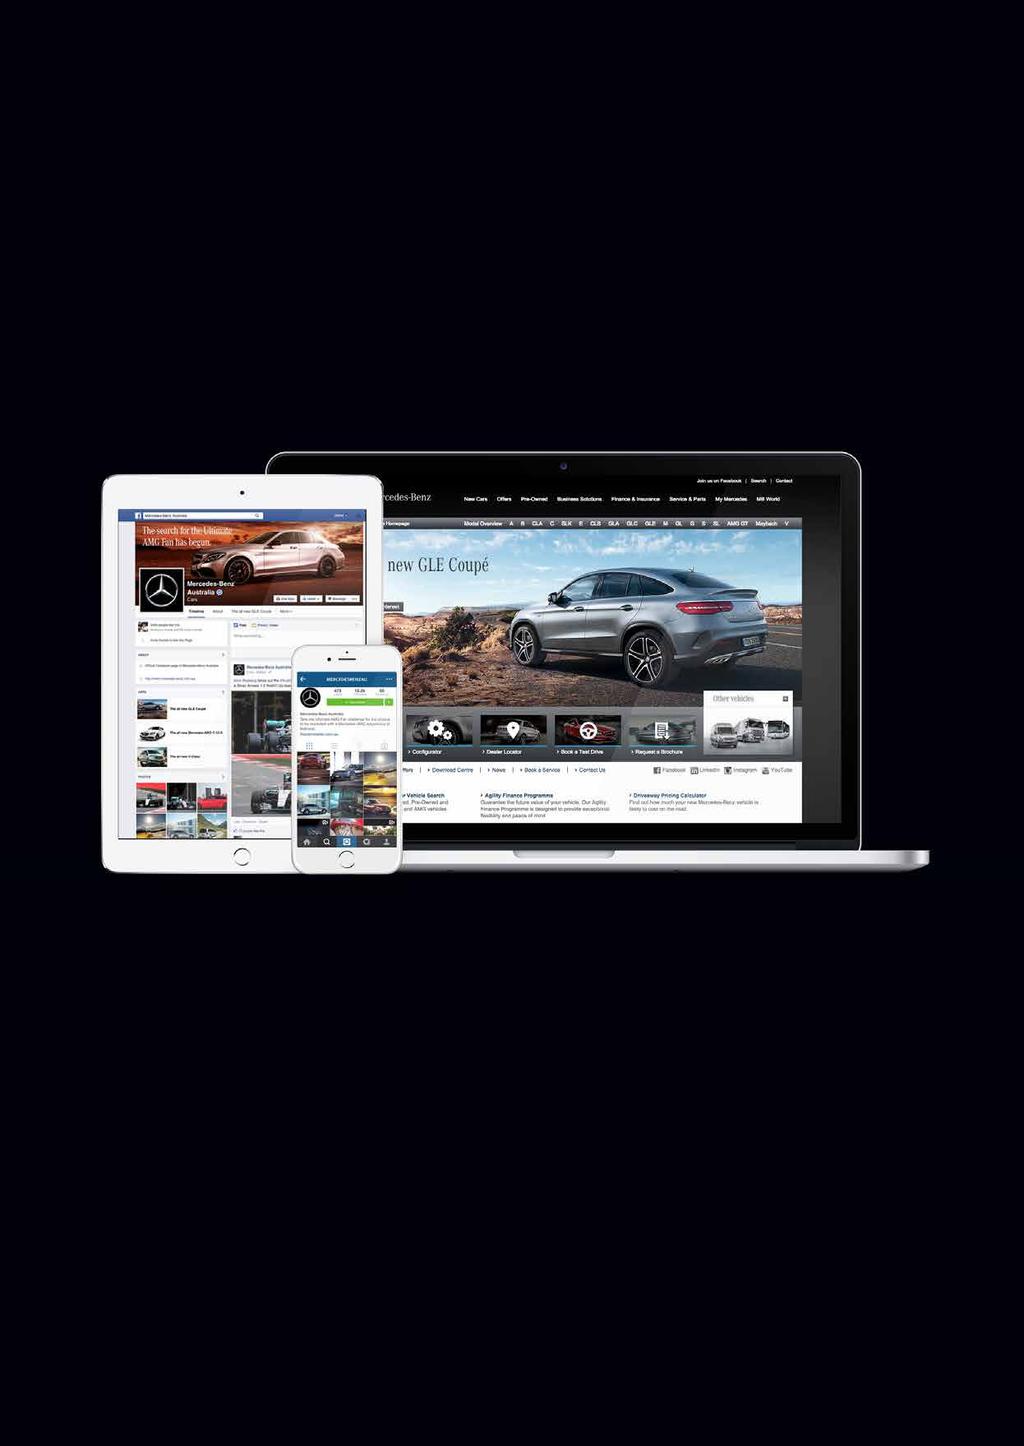 Stay up to date with Mercedes-Benz New Zealand. www.mercedes-benz.co.